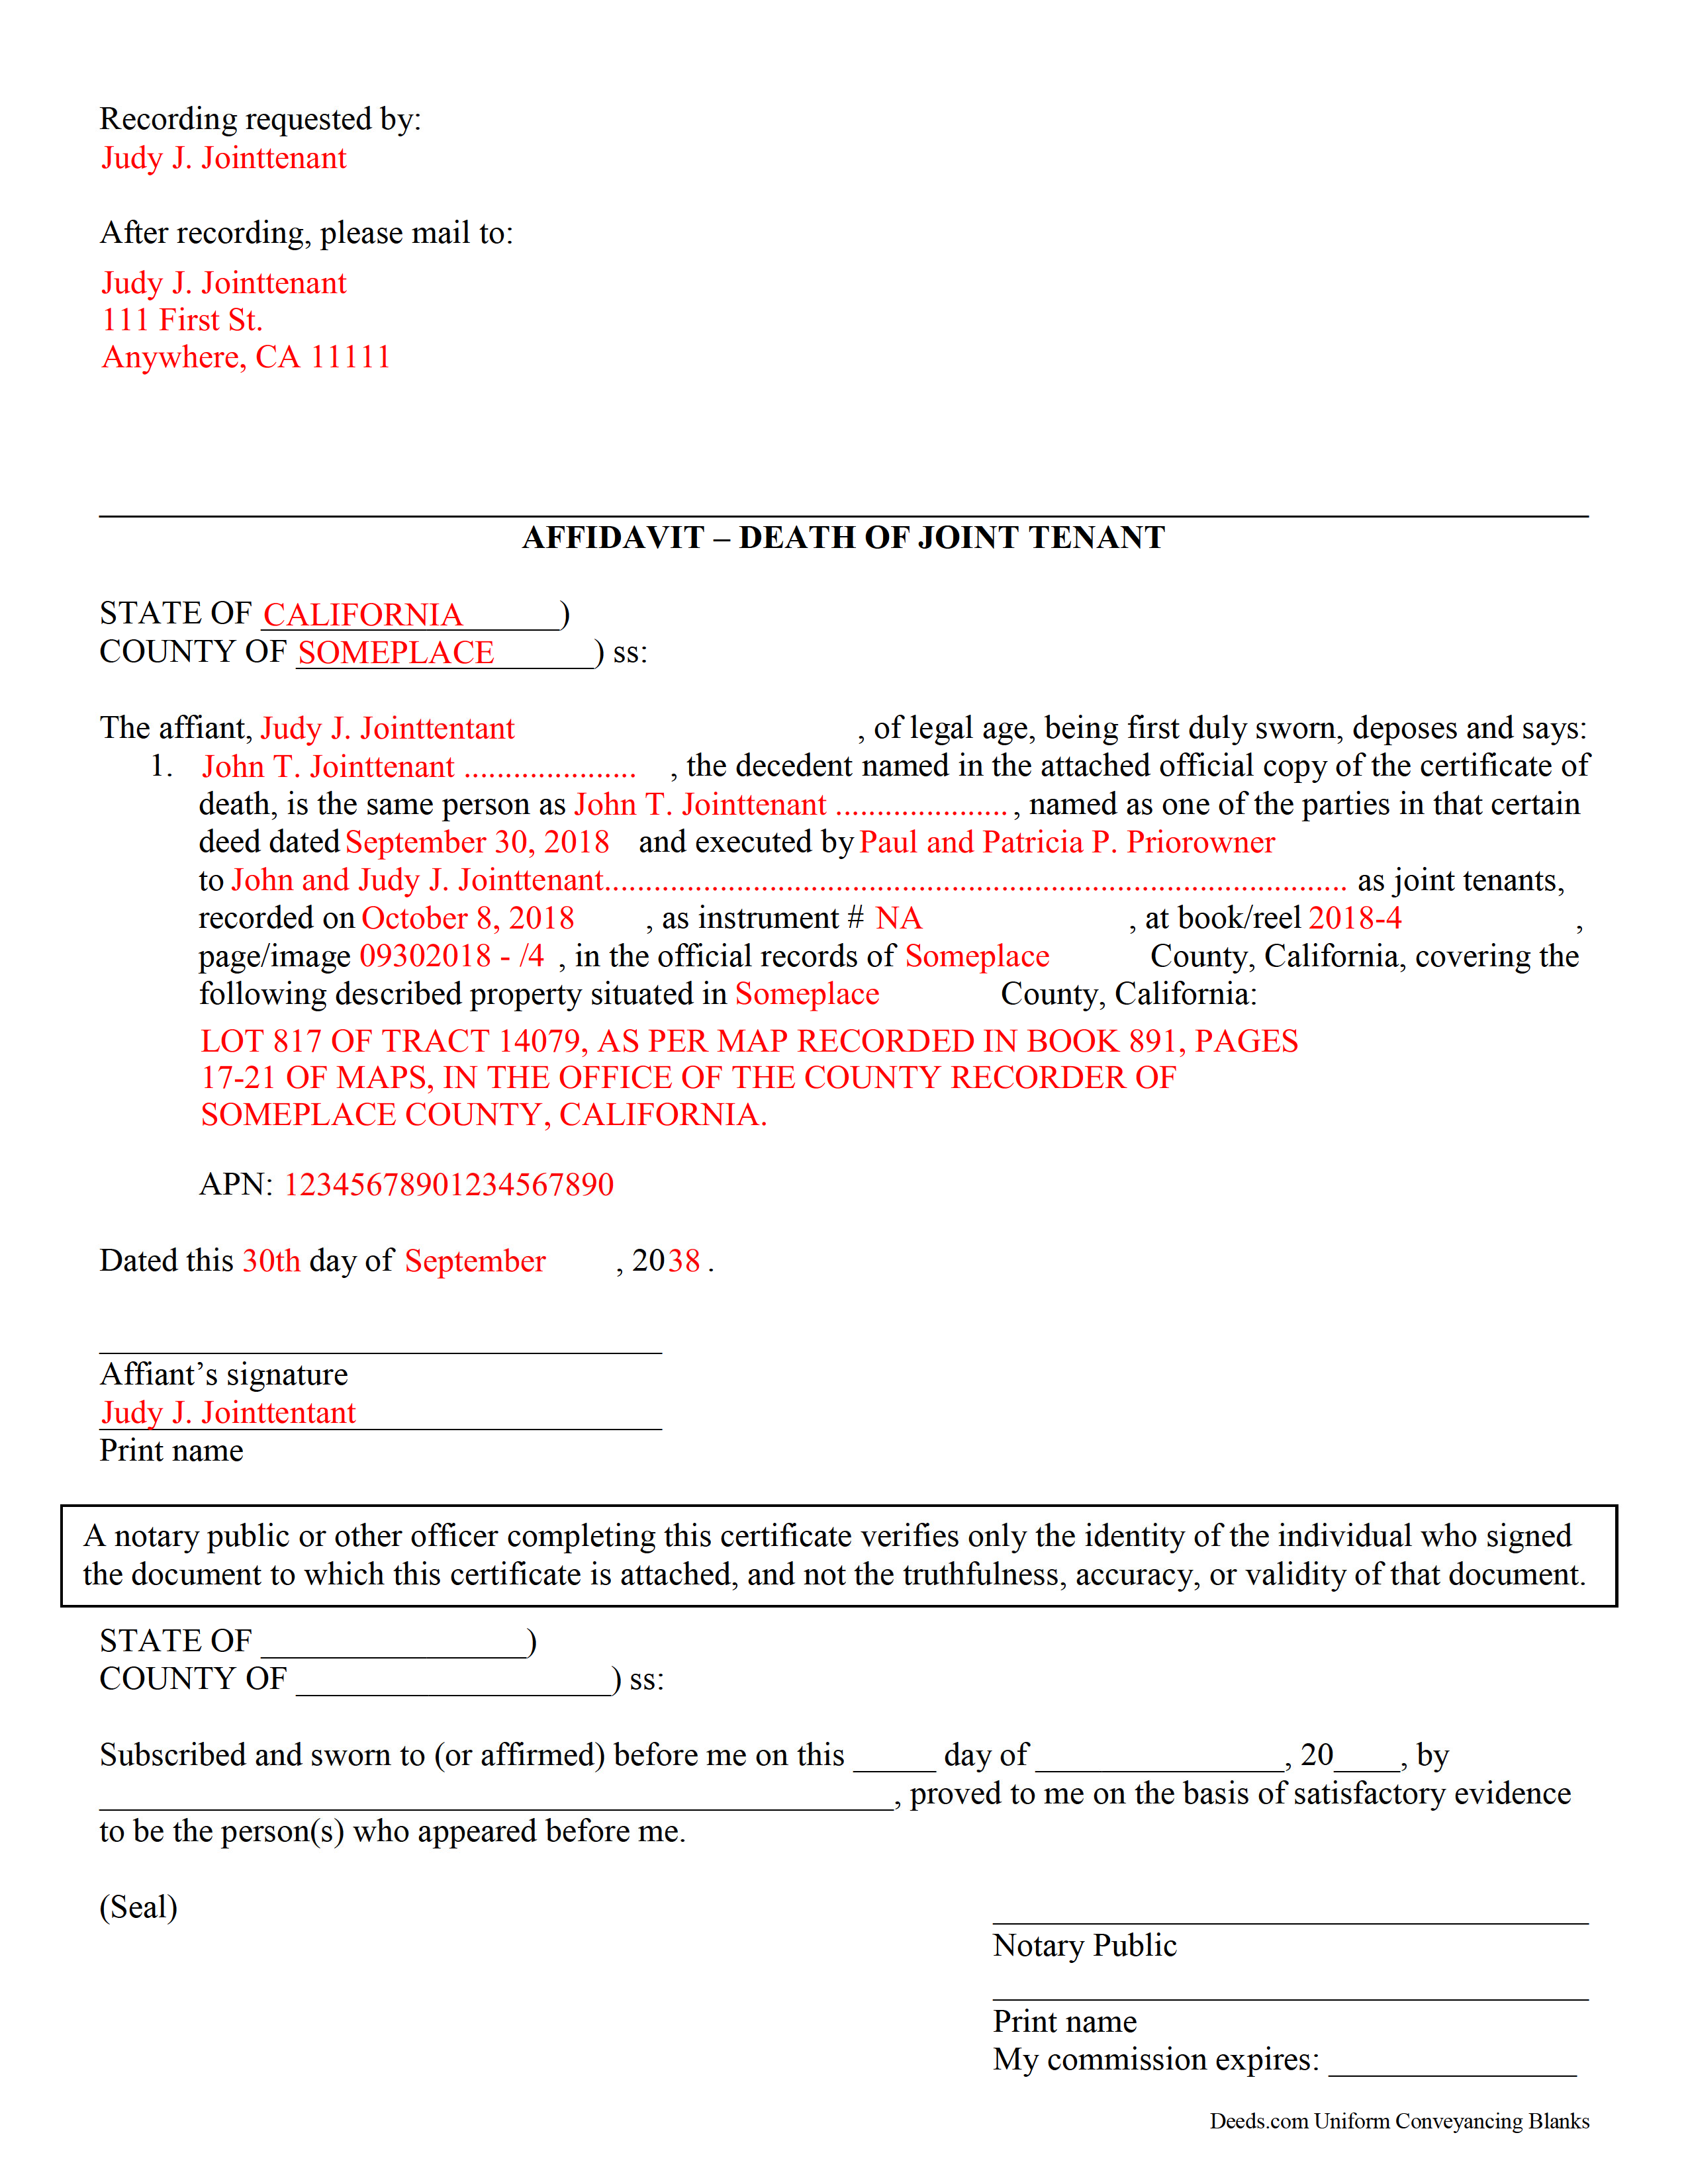 Completed Example of a Affidavit of Death of Joint Tenant Document